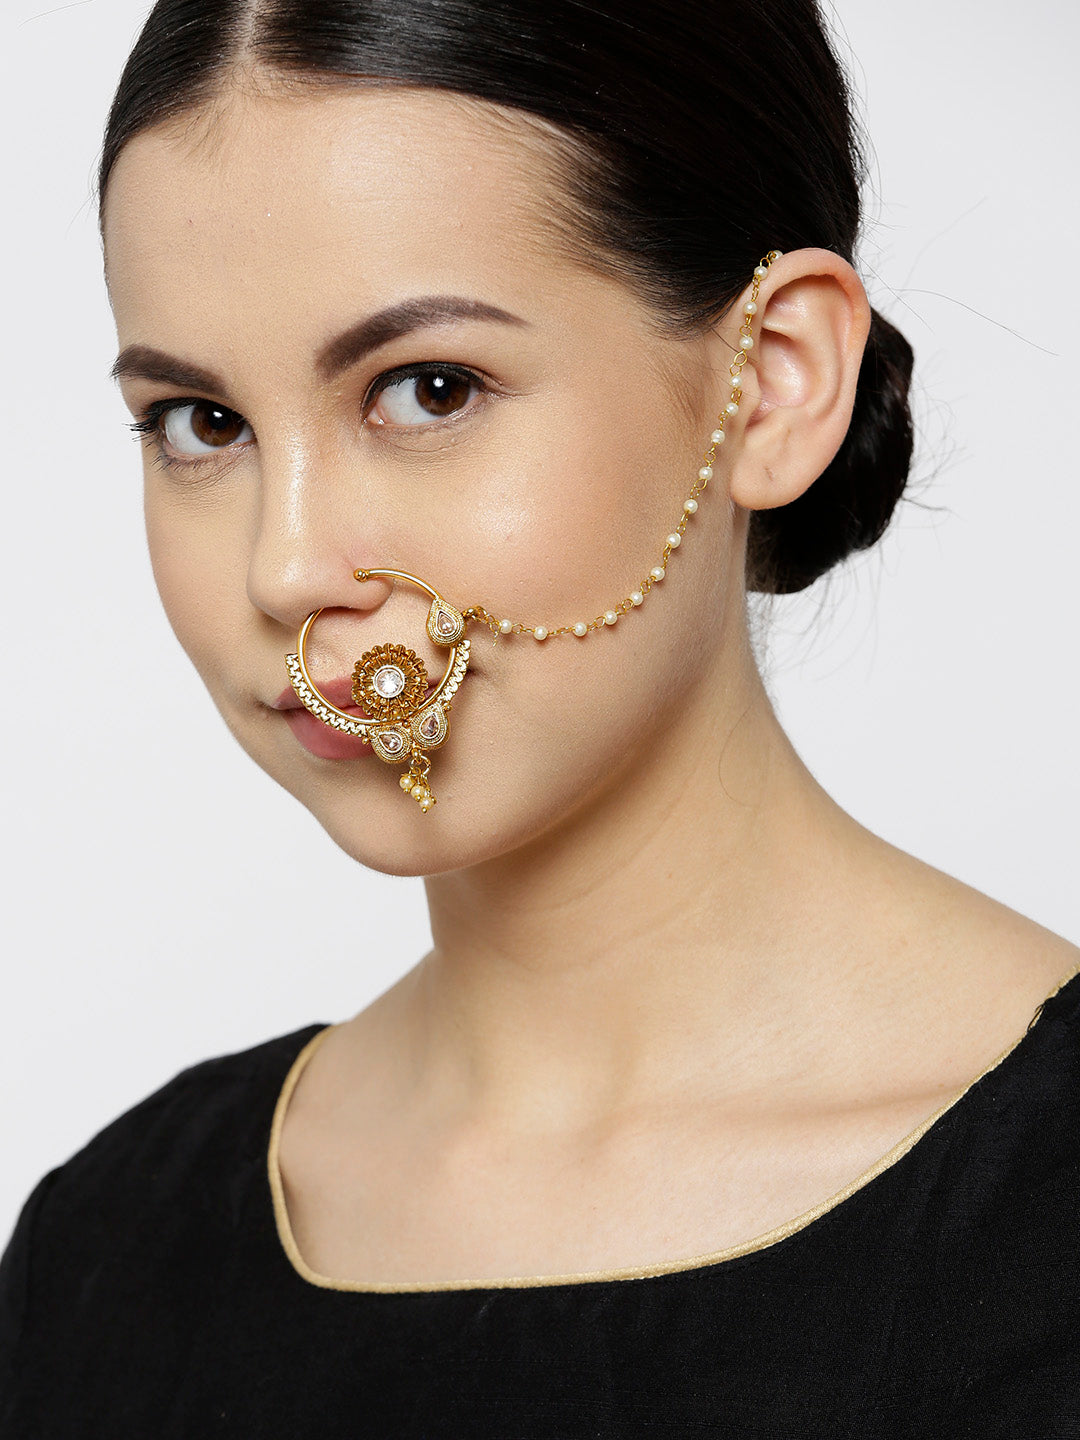 Traditional NoseRing/Nath With Pearl Chain For Women And Girls